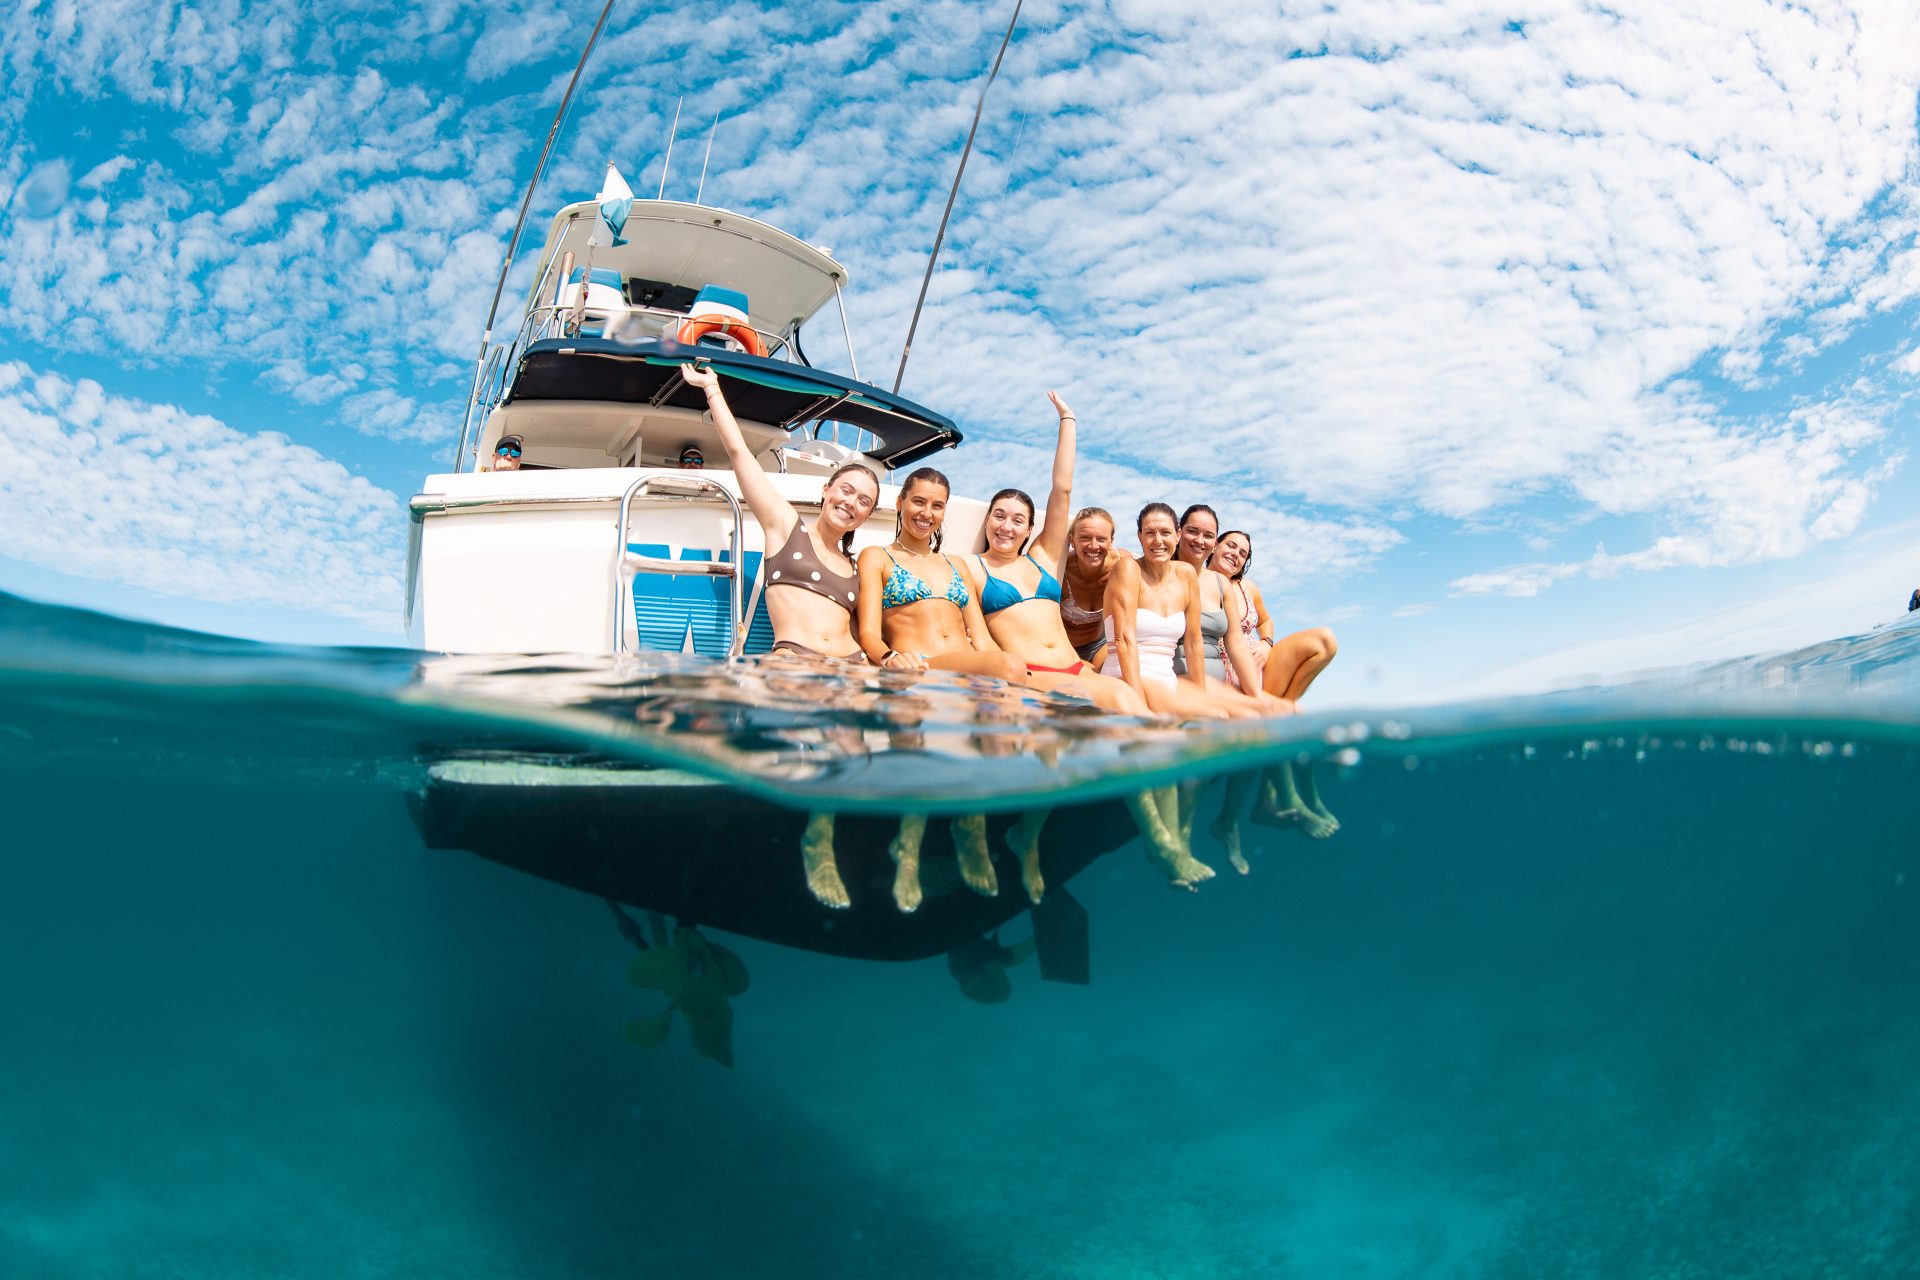 There are seven women on the back deck of Wave Rider, Live Ningaloo's boat. They are all smiling, and two people have their hands in the air in celebration. The image has blue sky with white fluffy clouds and the water of the Ningaloo reef below. You can see their feet too.